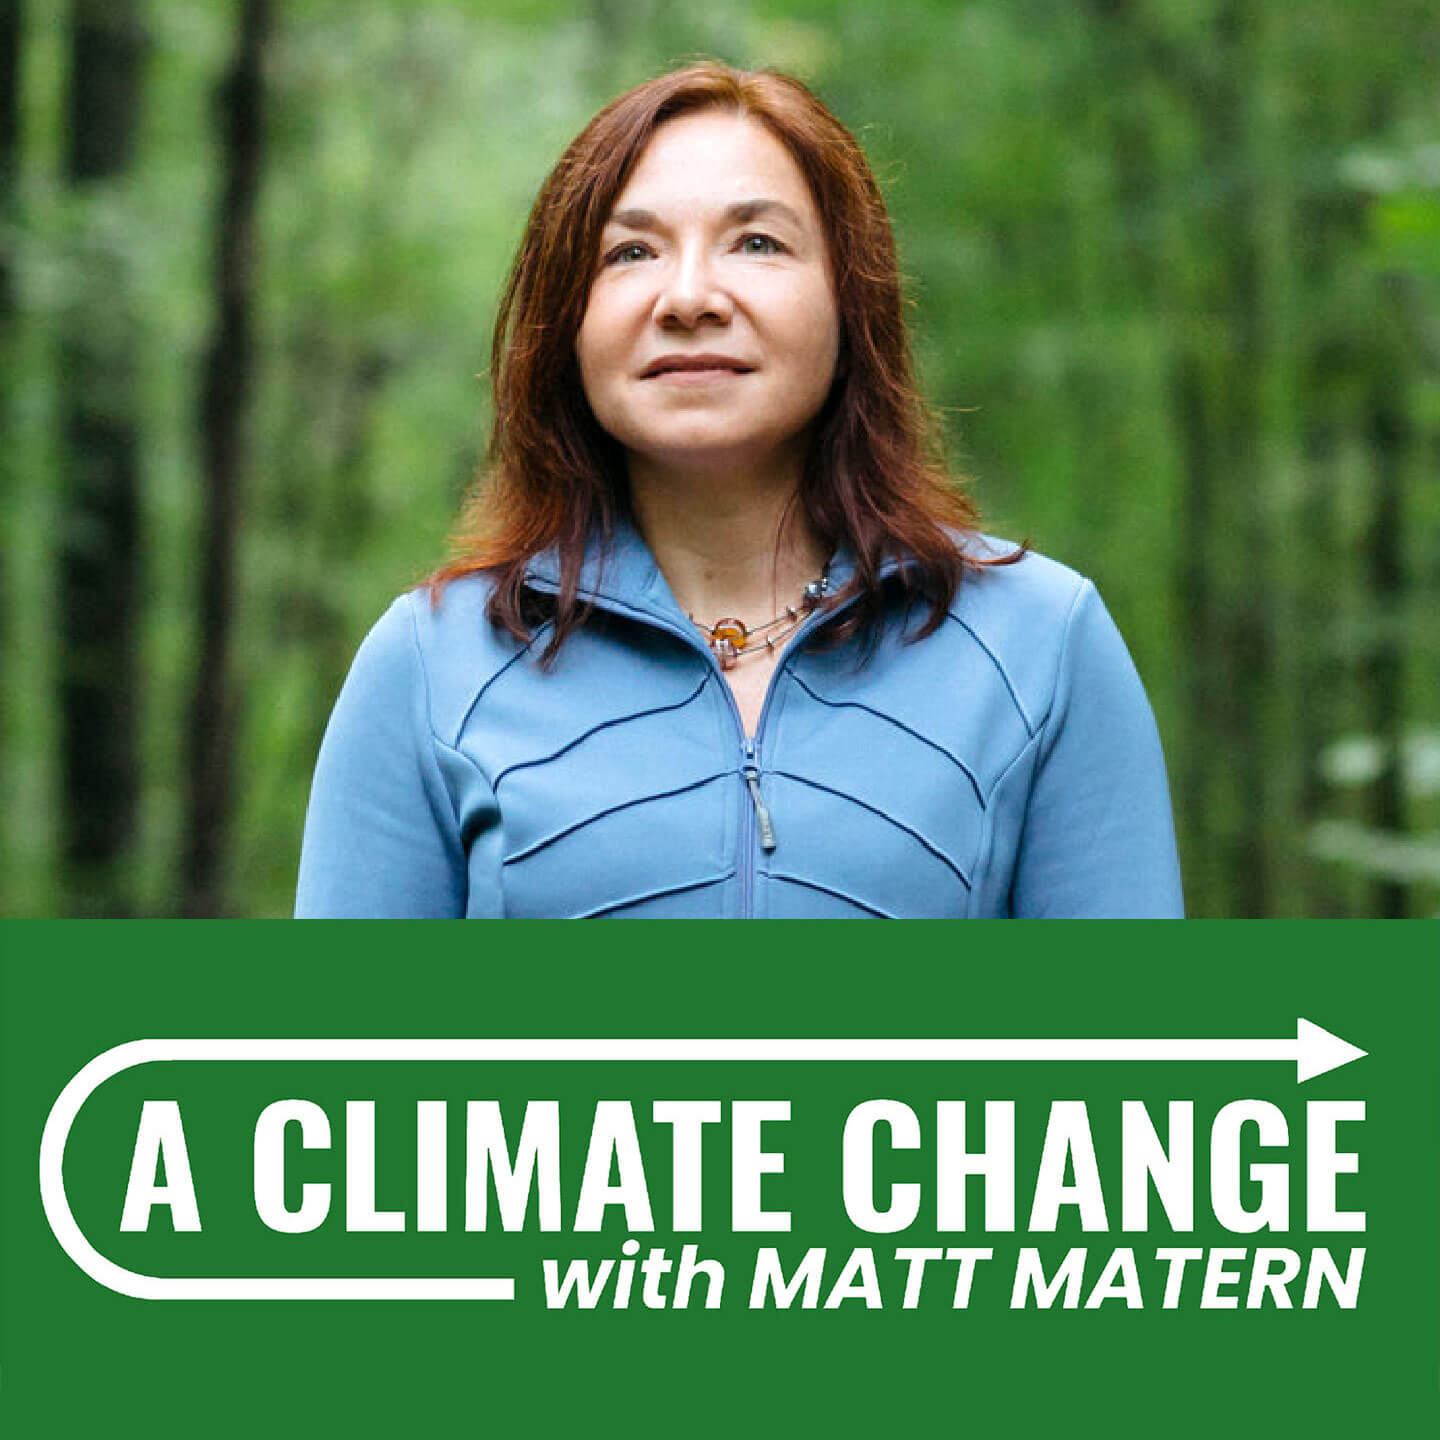 126: Dr. Katharine Hayhoe Fights Climate Change as an Evangelical Christian